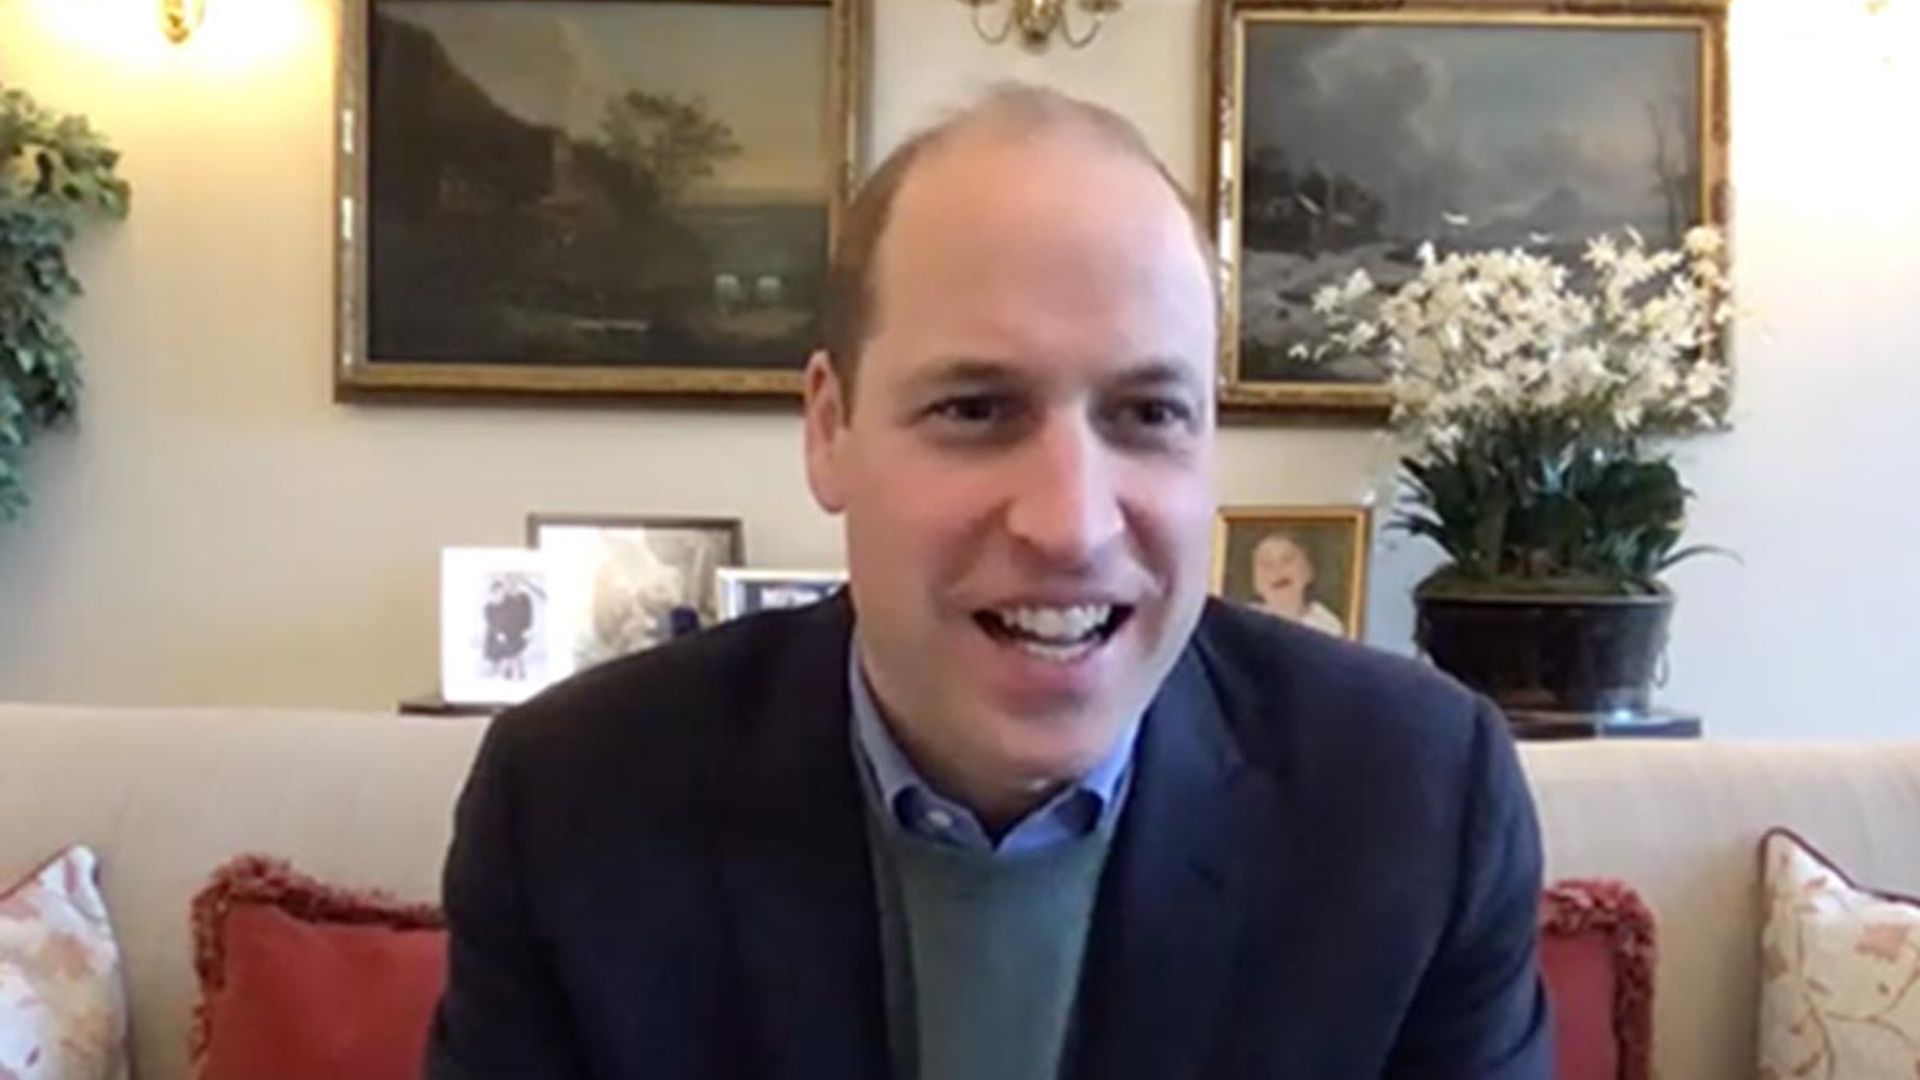 Prince William tells Oxford researchers 'you've cracked it' as he congratulates them on vaccine breakthrough